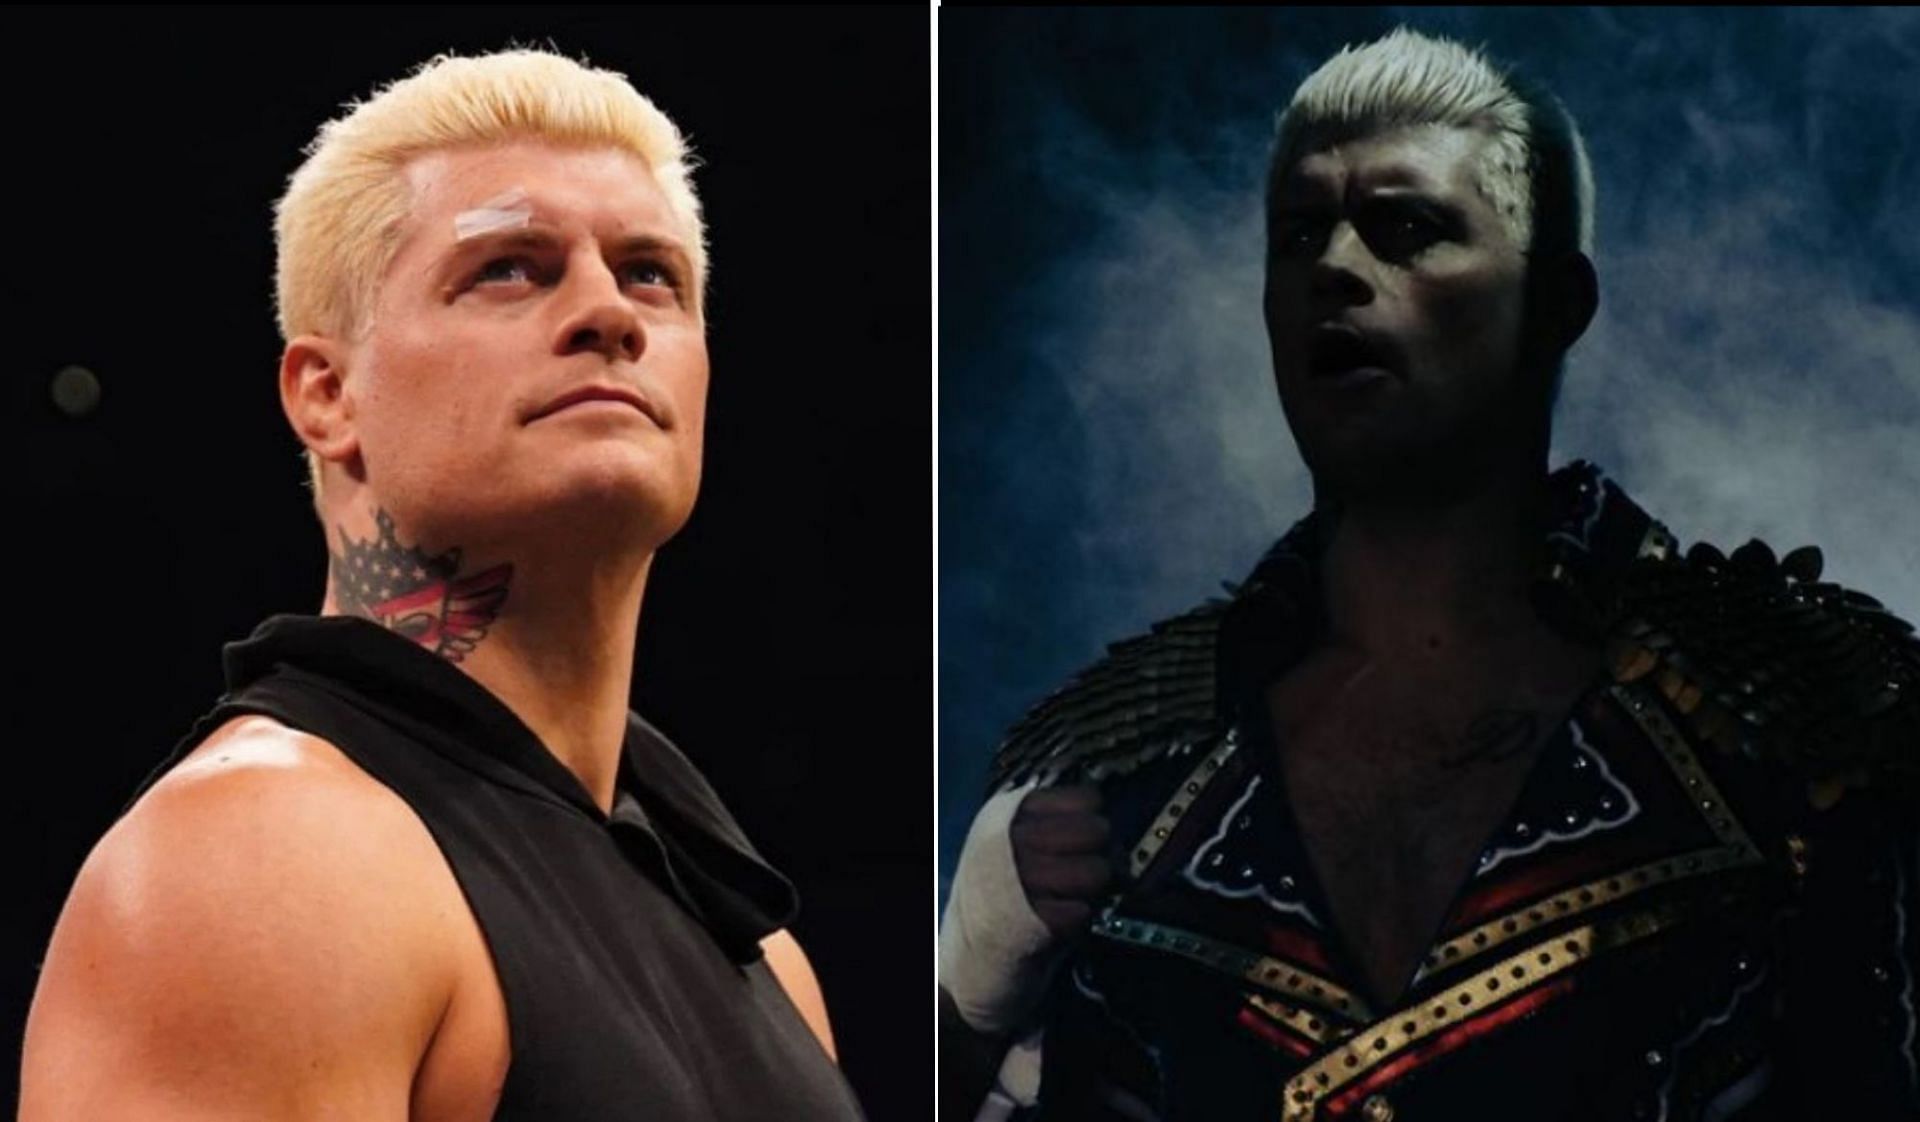 What are the chances that Cody Rhodes is playing the long game to make a big return?